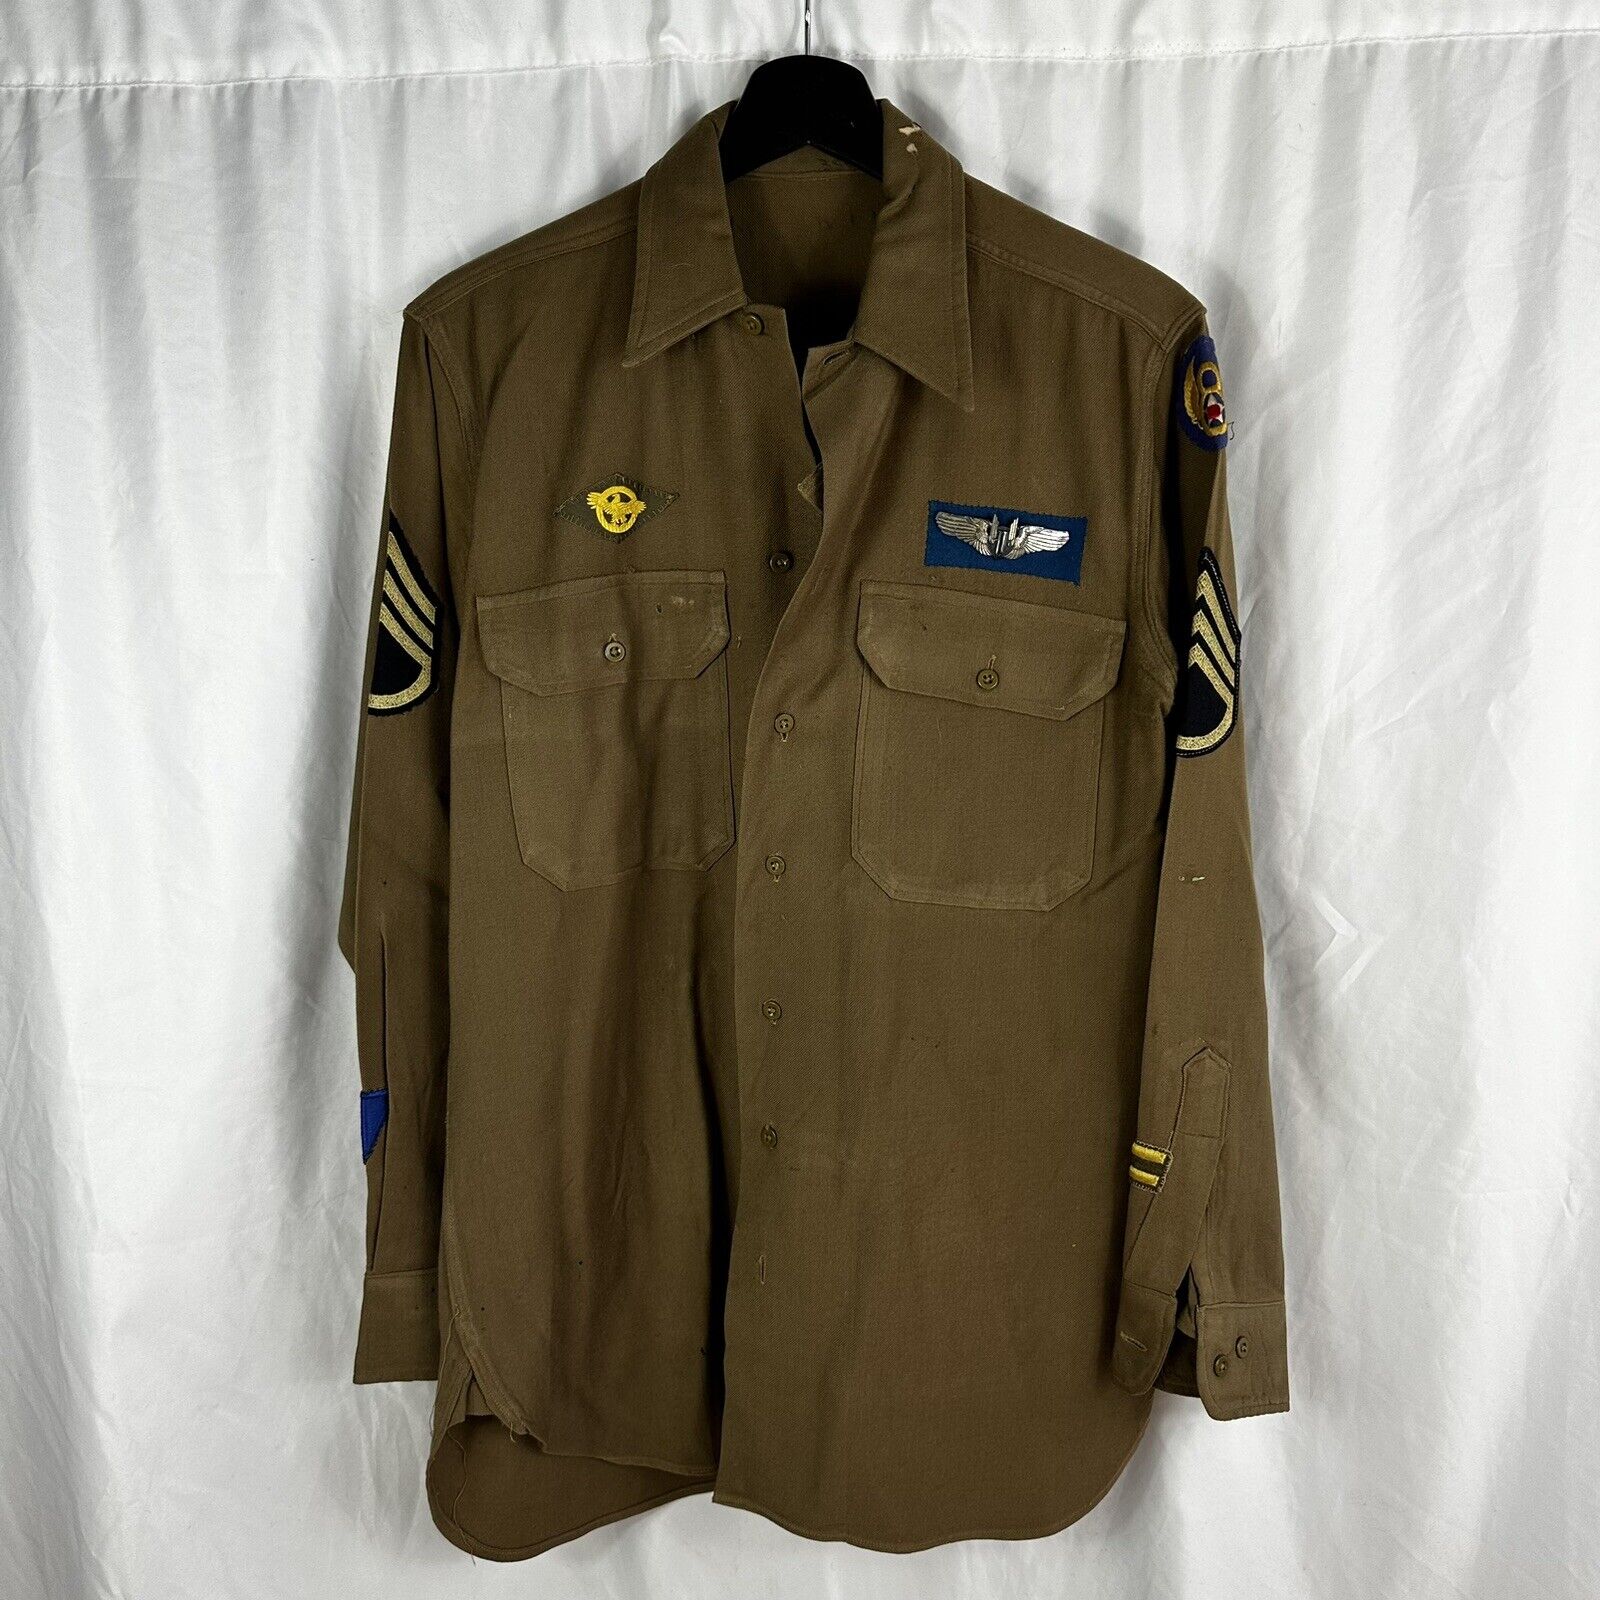 Original WWII US Army Air Corp Shirt w/ Sterling Wings & English 8th div patch